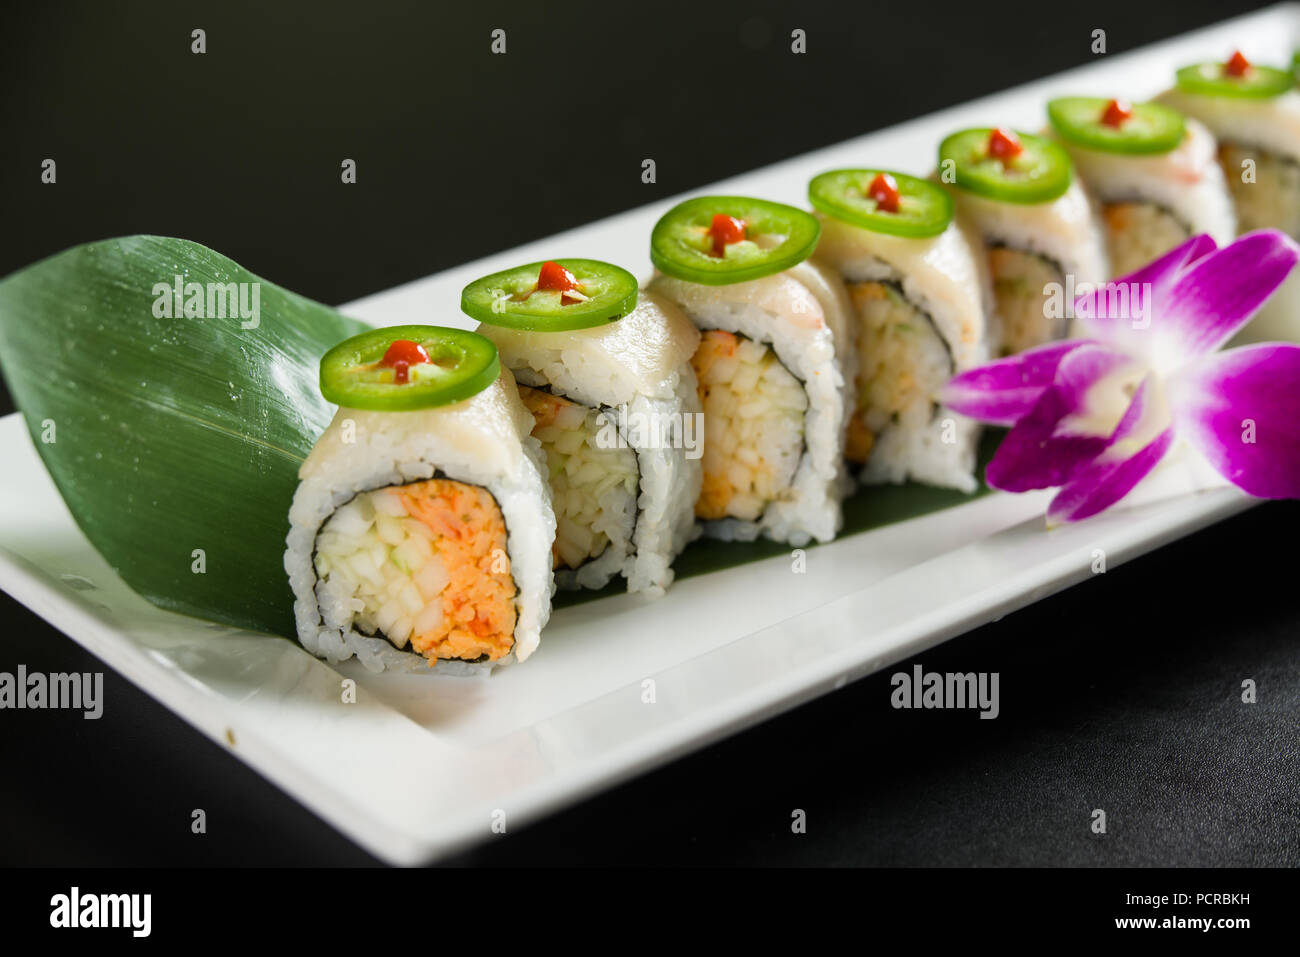 Sushi on a white plate Banque D'Images